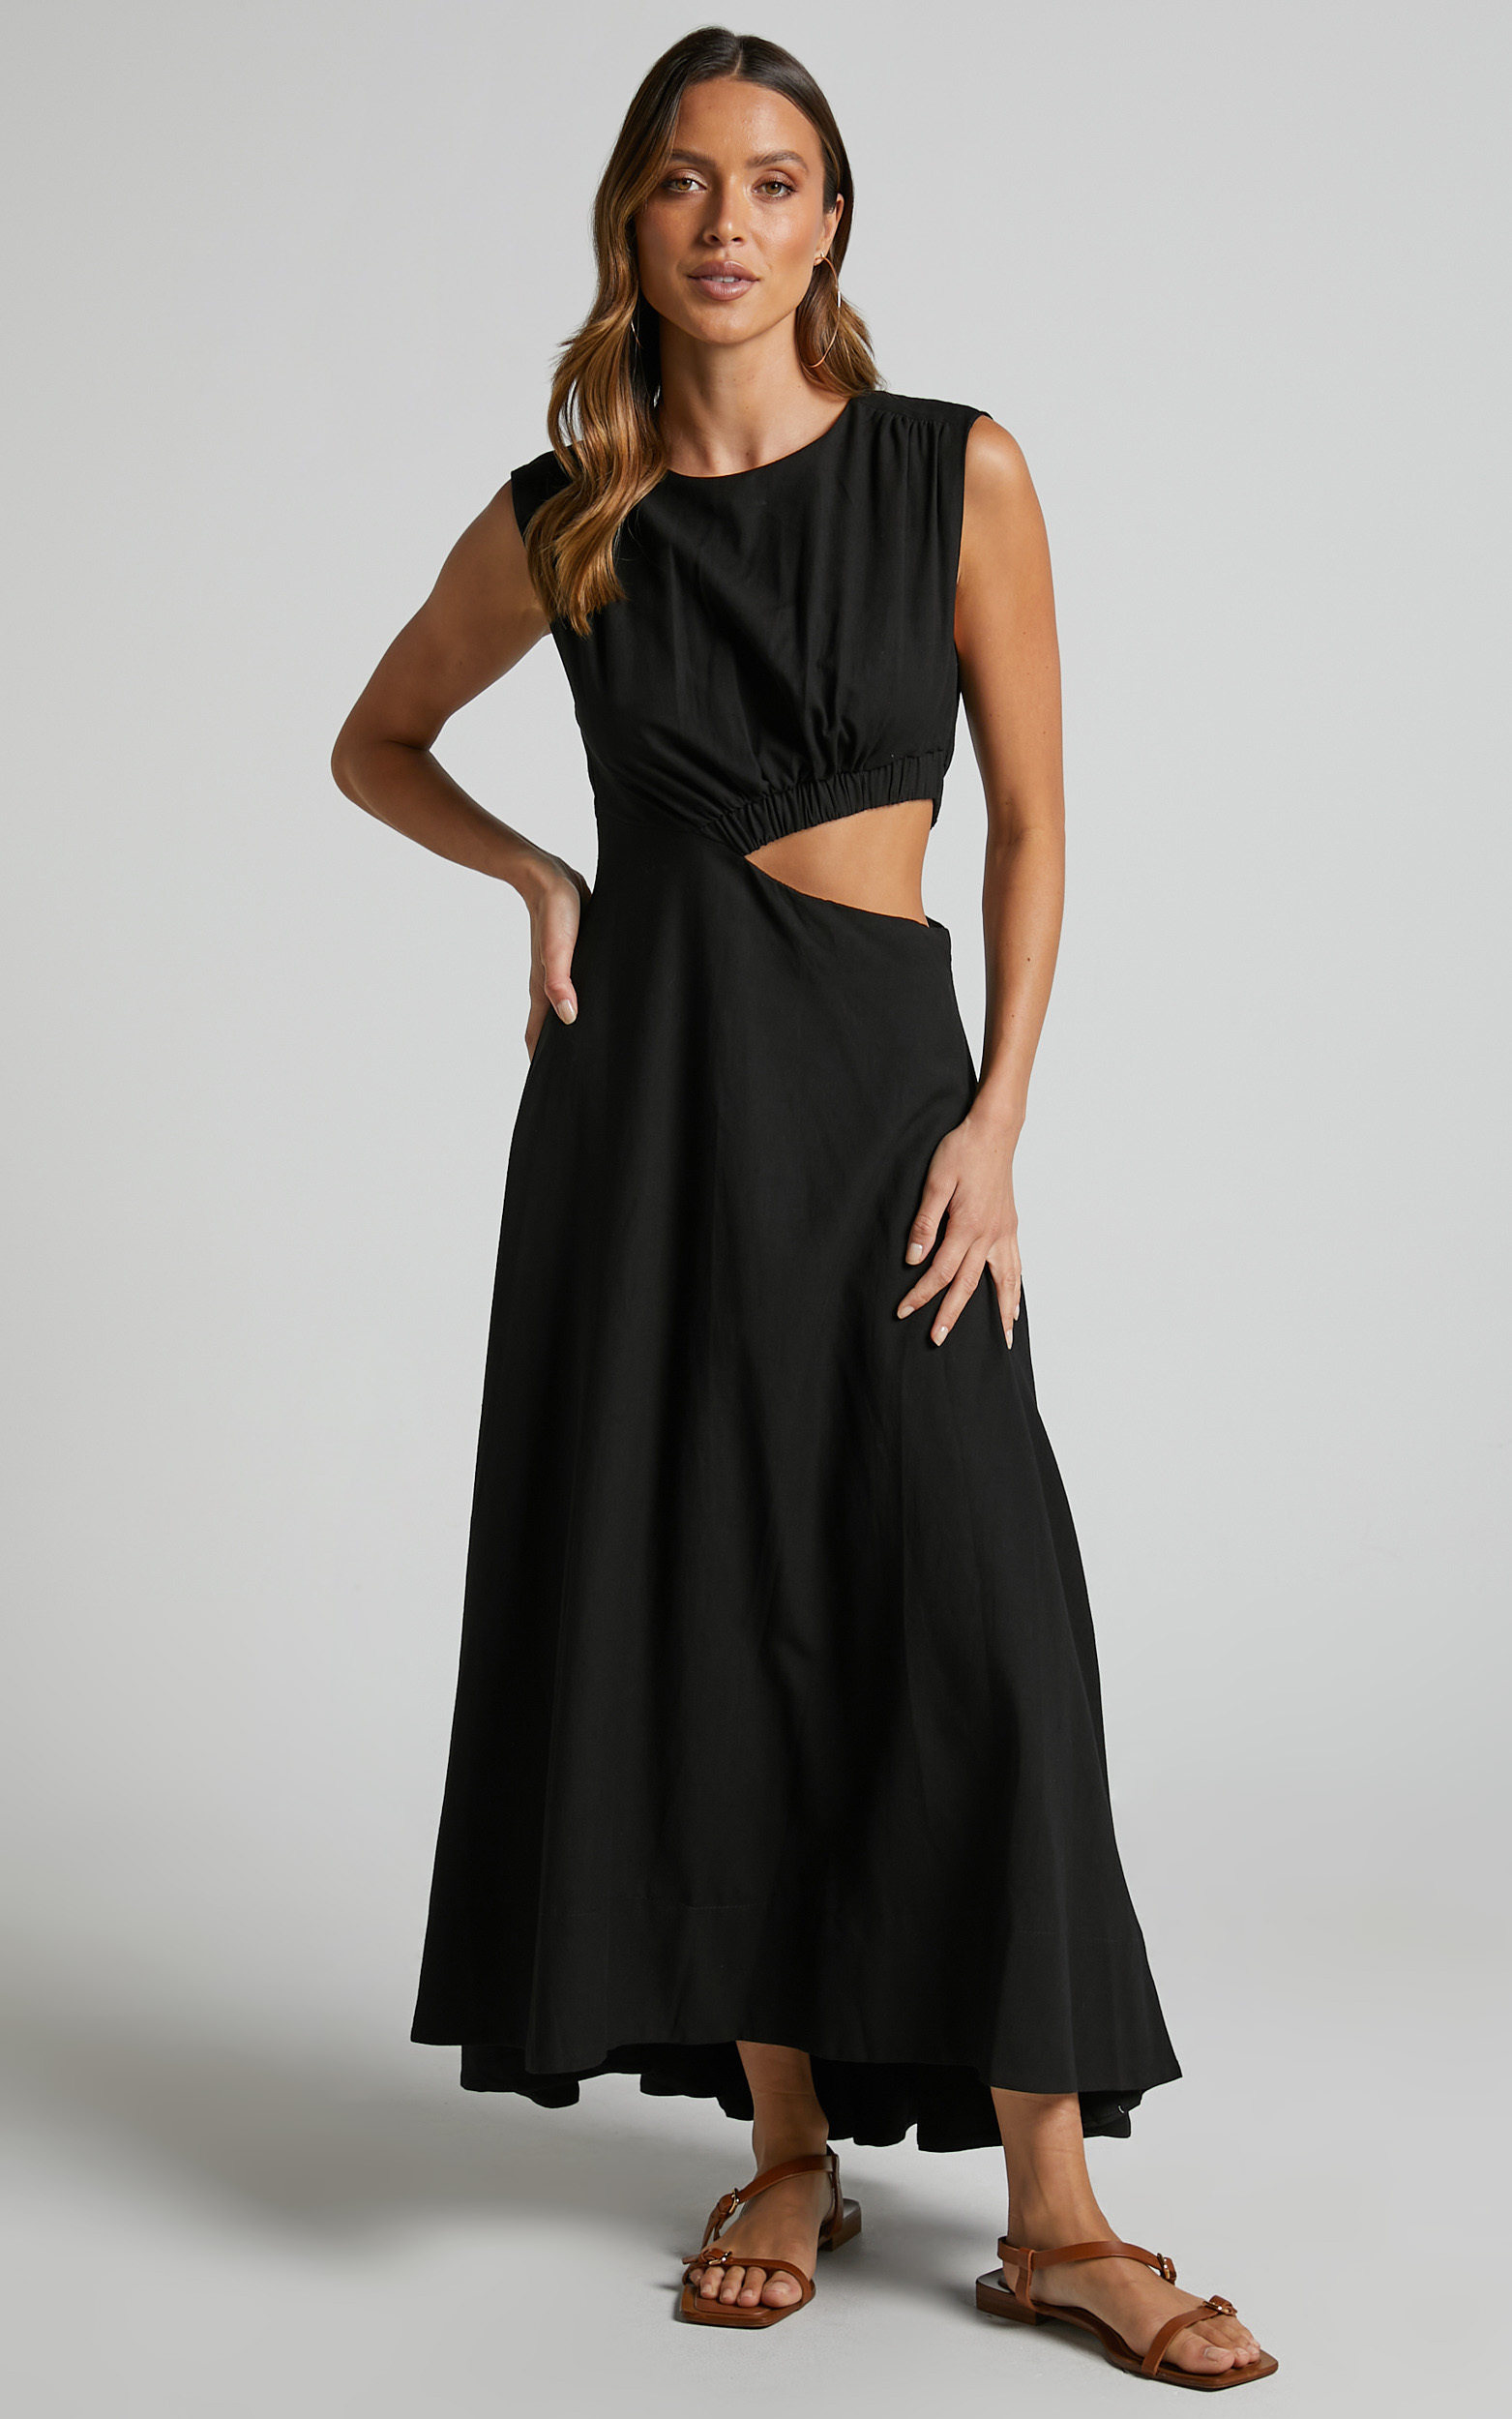 Martha A Line Side Cutout Sleeveless Midi Dress in Black - 06, BLK1, hi-res image number null